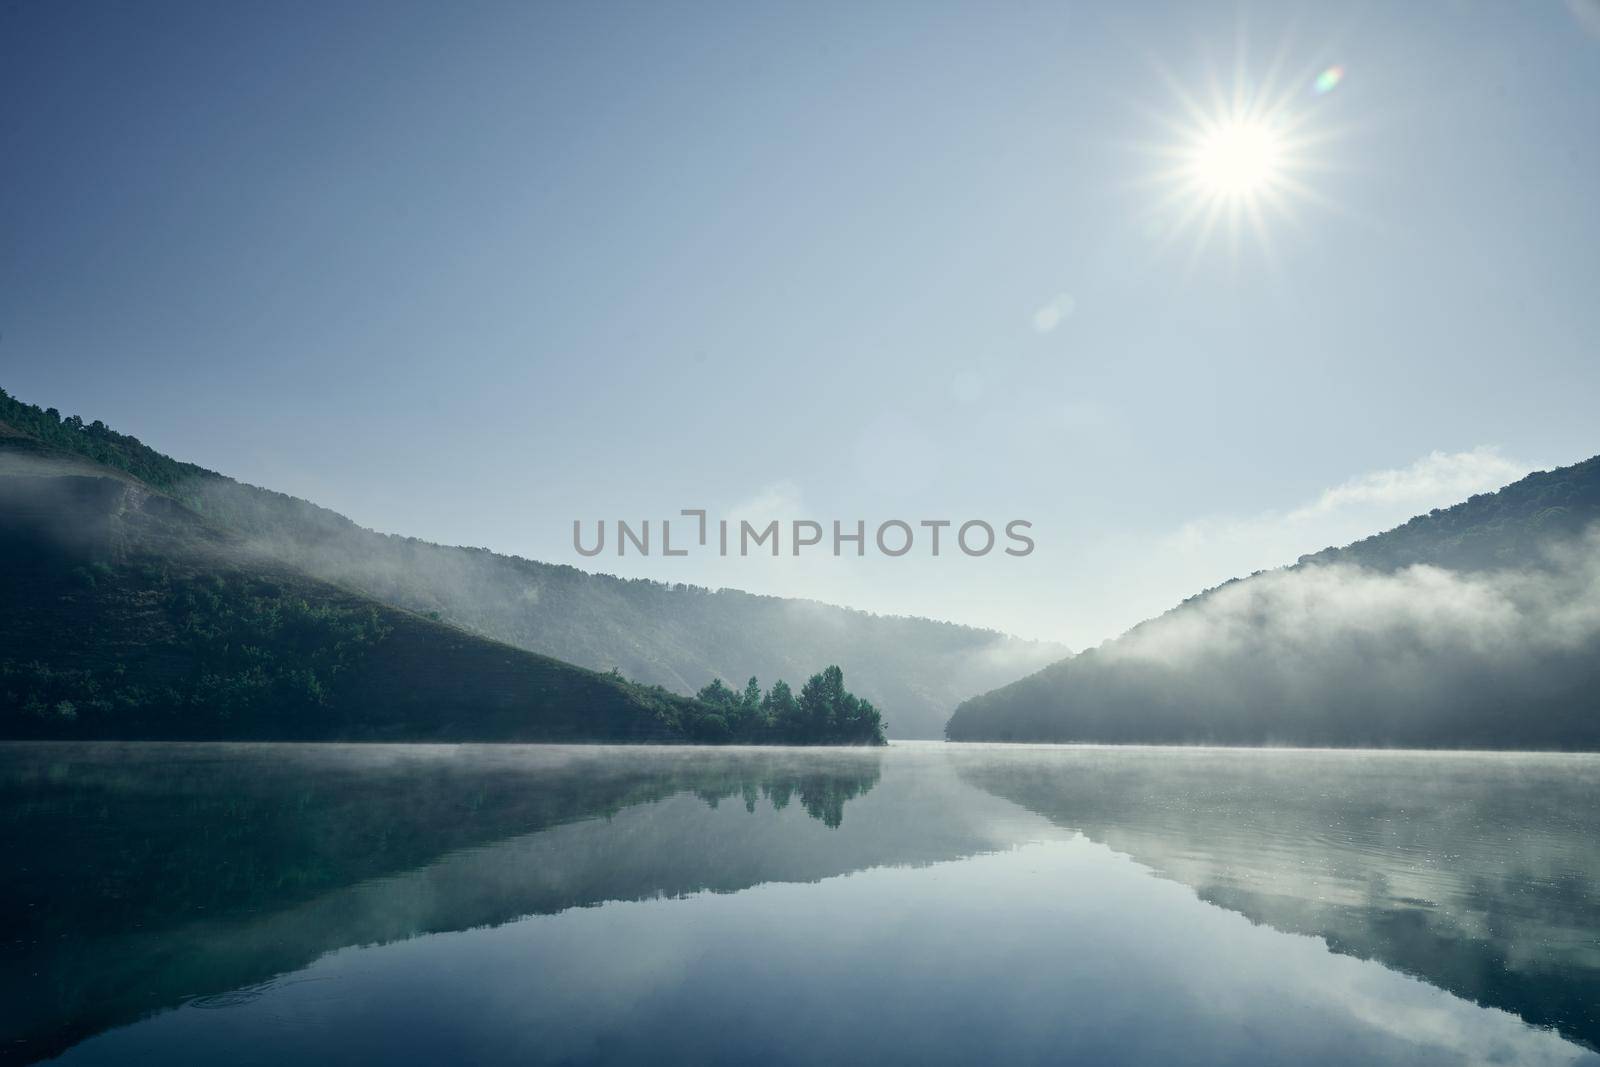 Morning landscape on river and hilly shores. Sunrise in mountains. Light fog rising above water. Mountains covering with forests. Still water.